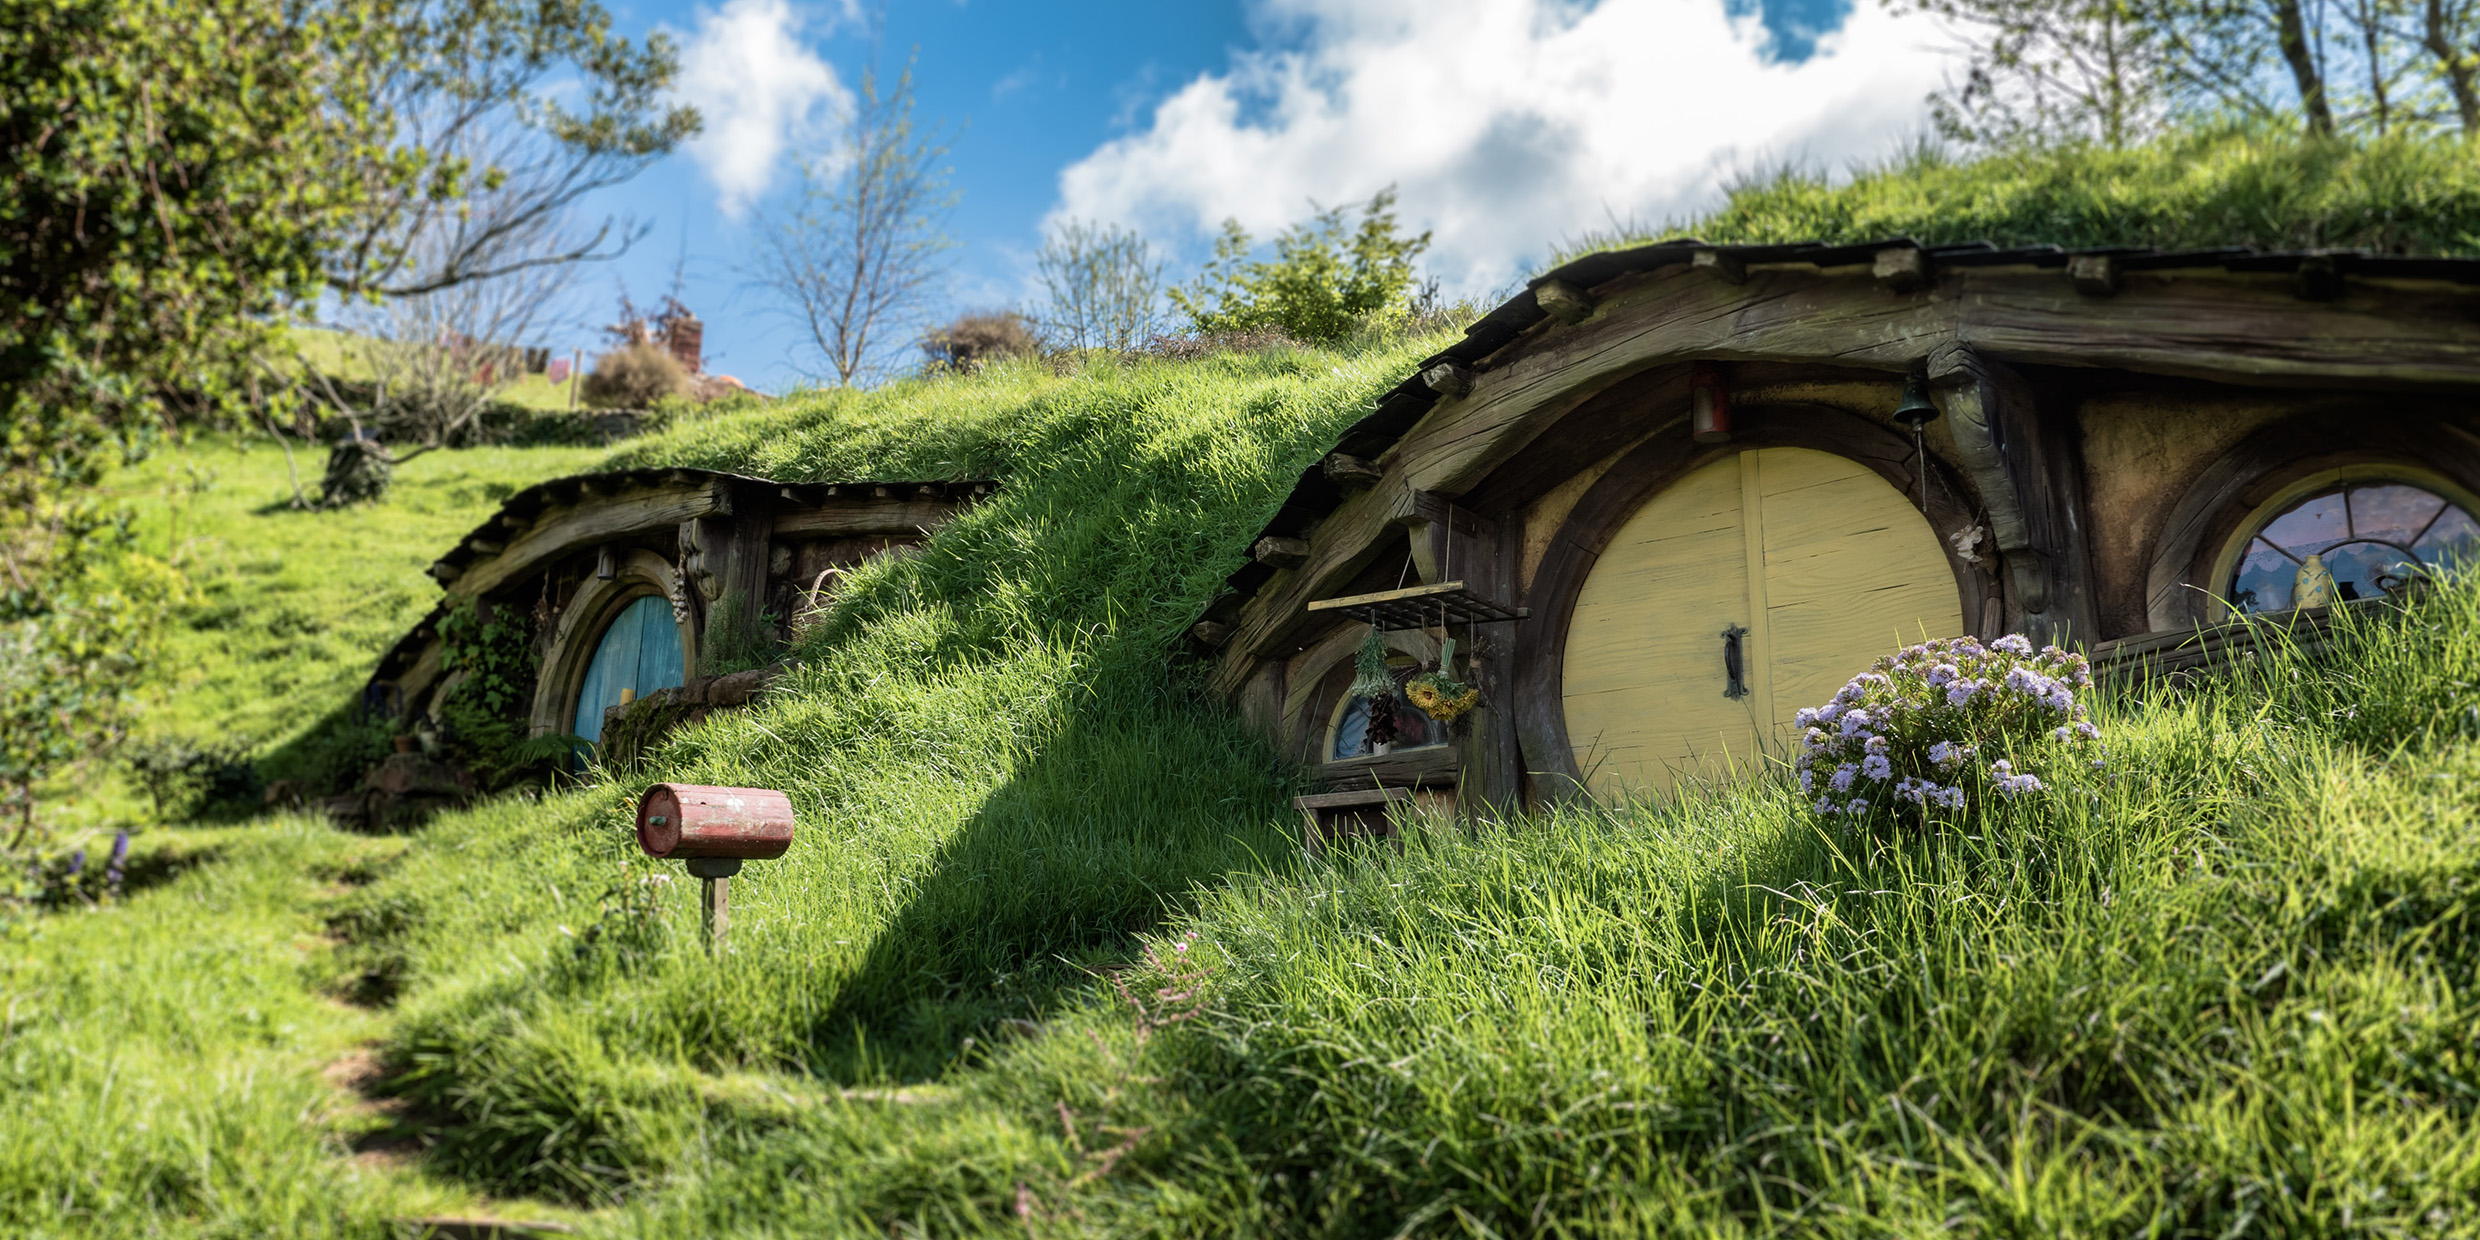 Image of two grass-roofed Hobbit dwellings from the “Lord of the Rings” movie set